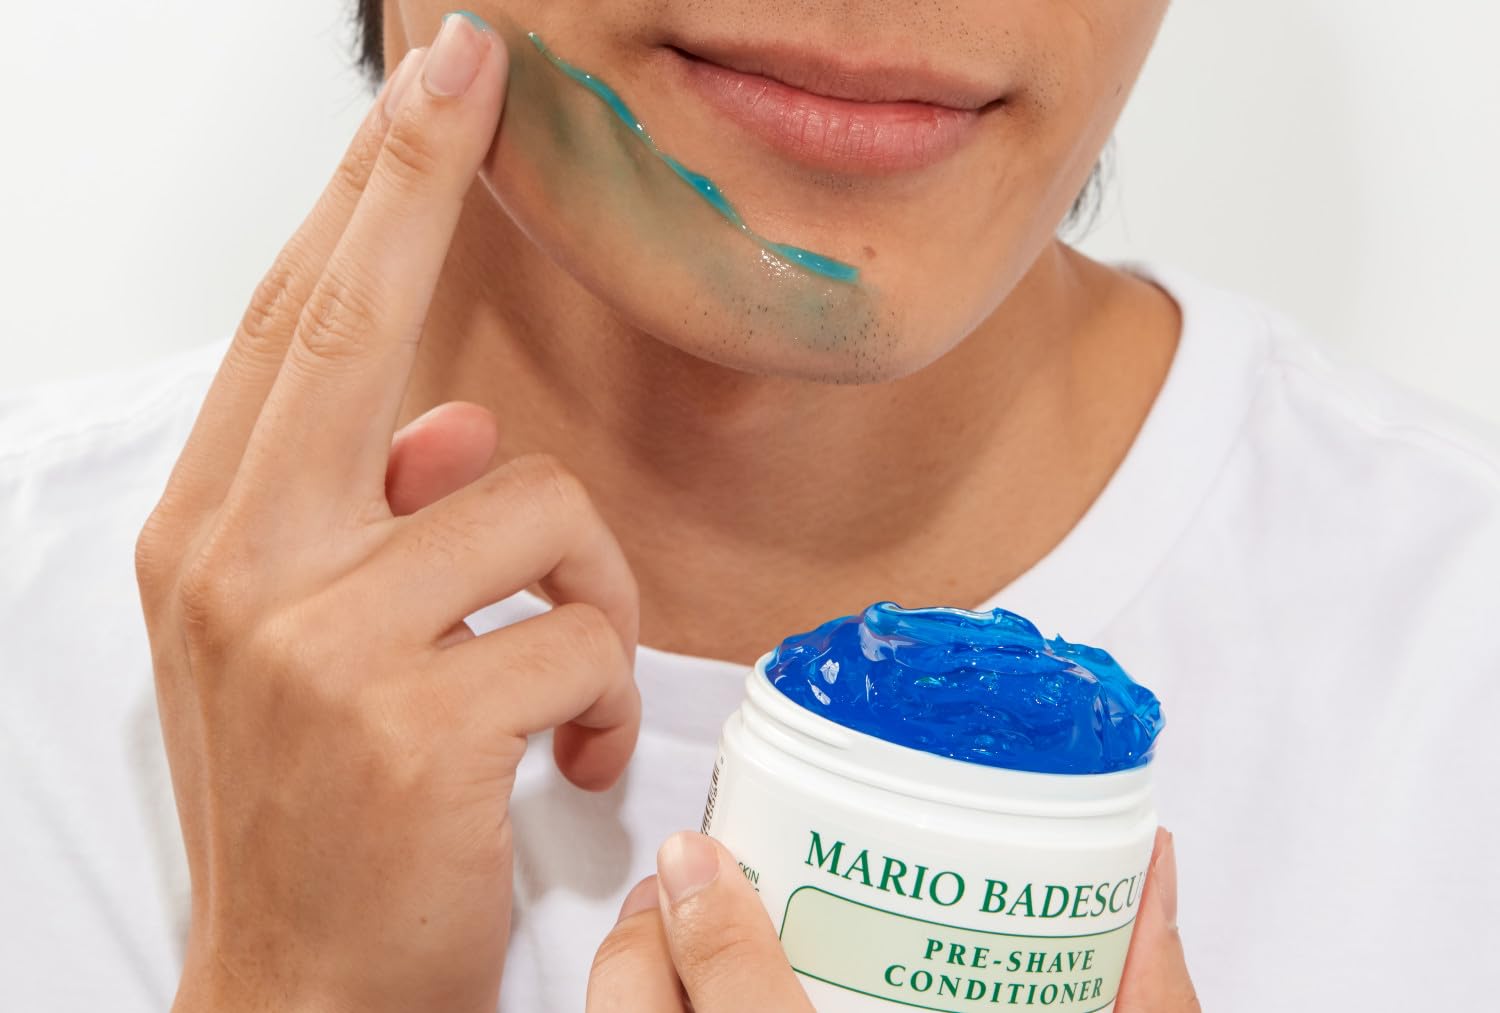 Mario Badescu Pre-Shave Conditioner | Soothing, Botanical-infused Pre Shave Gel for Your Best Shave Yet | Preps, Primes, and Softens Skin and Hair